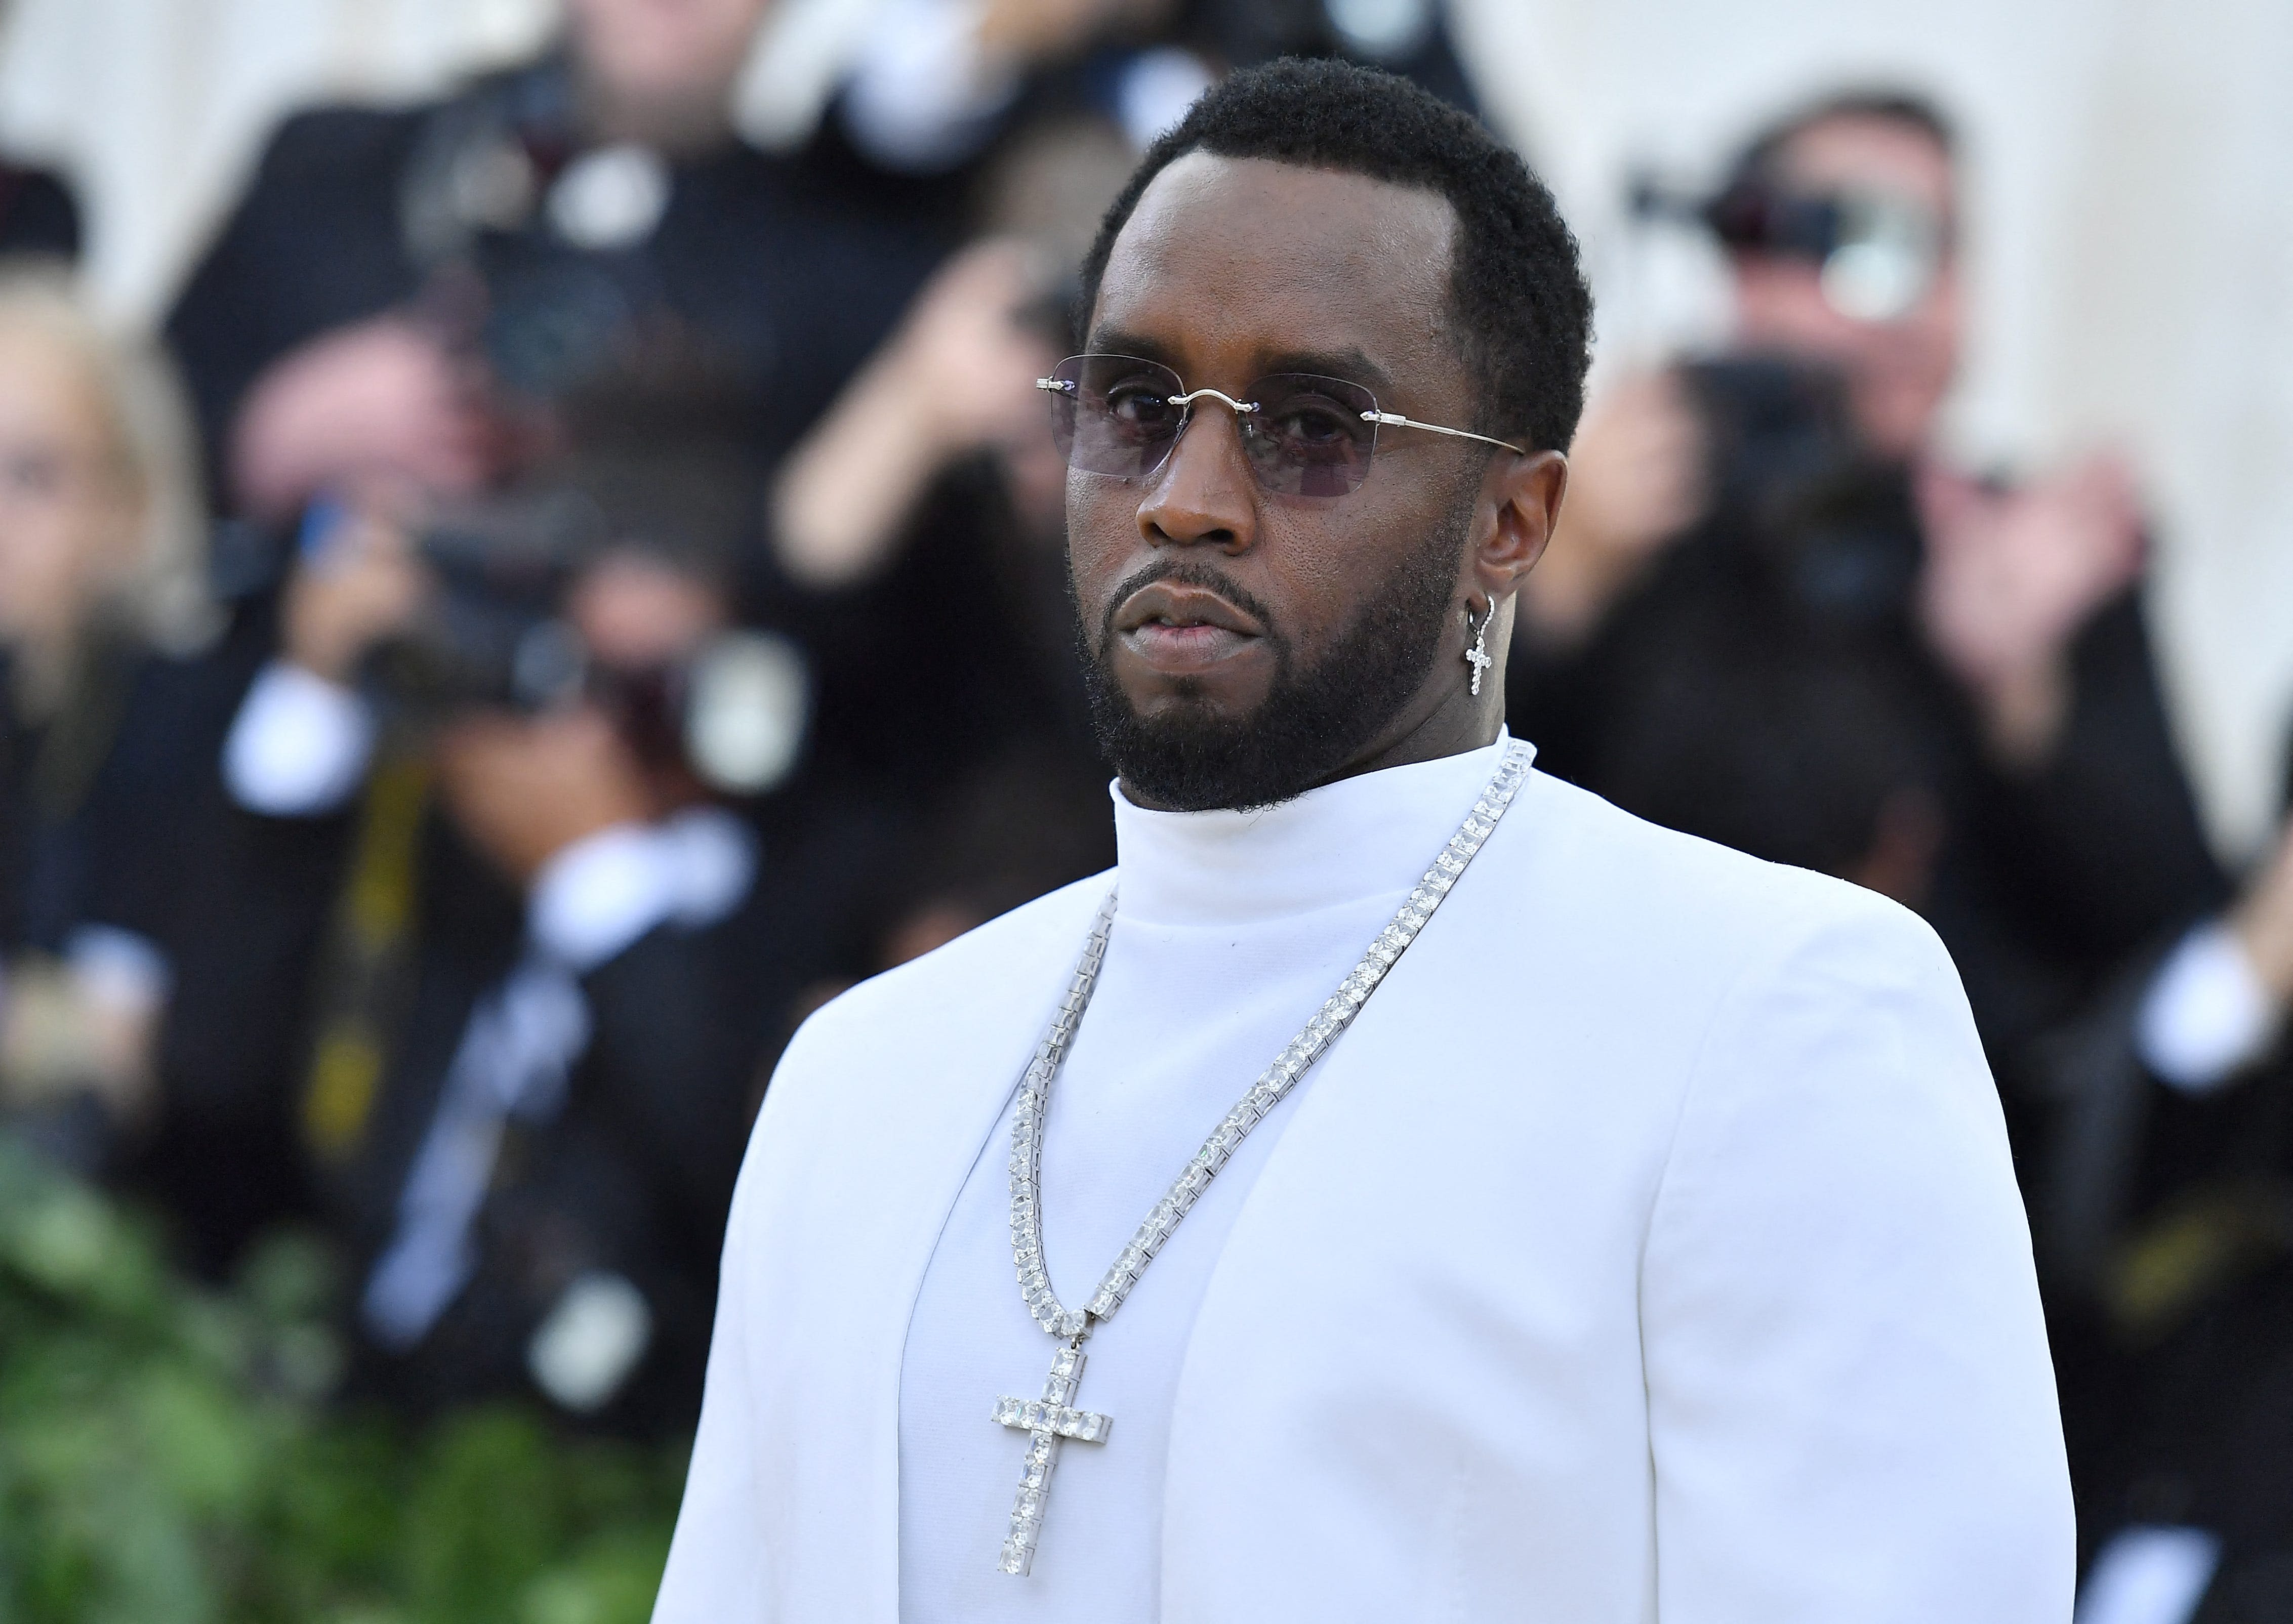 Sean 'Diddy' Combs owned up to violent assault of Cassie caught on video. Should he have?